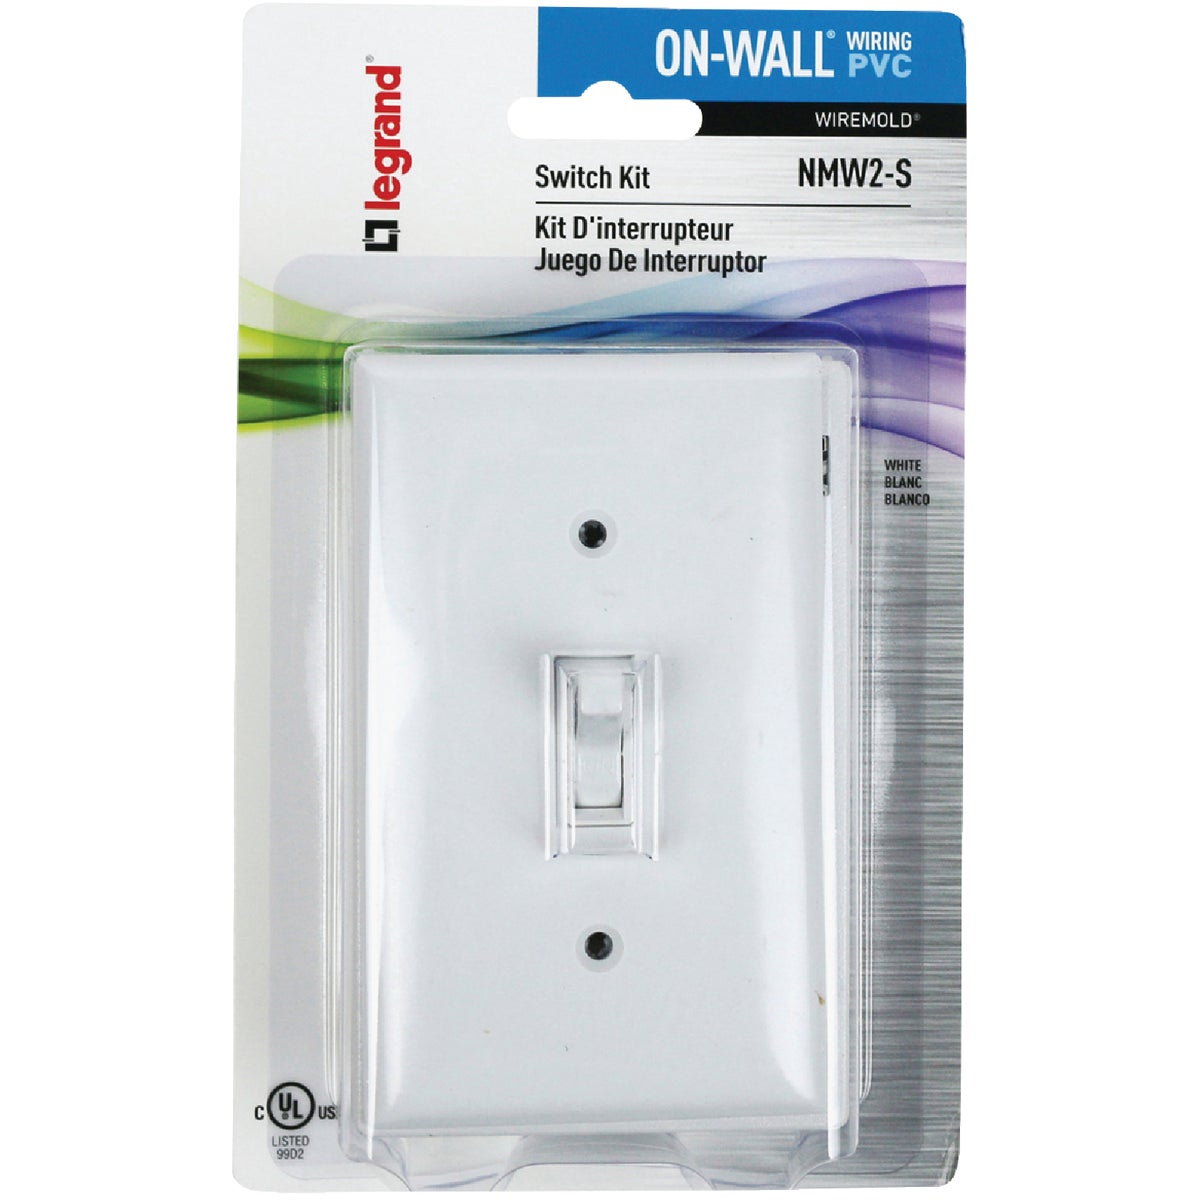 Wiremold On-Wall White PVC 1 In. Switch Kit